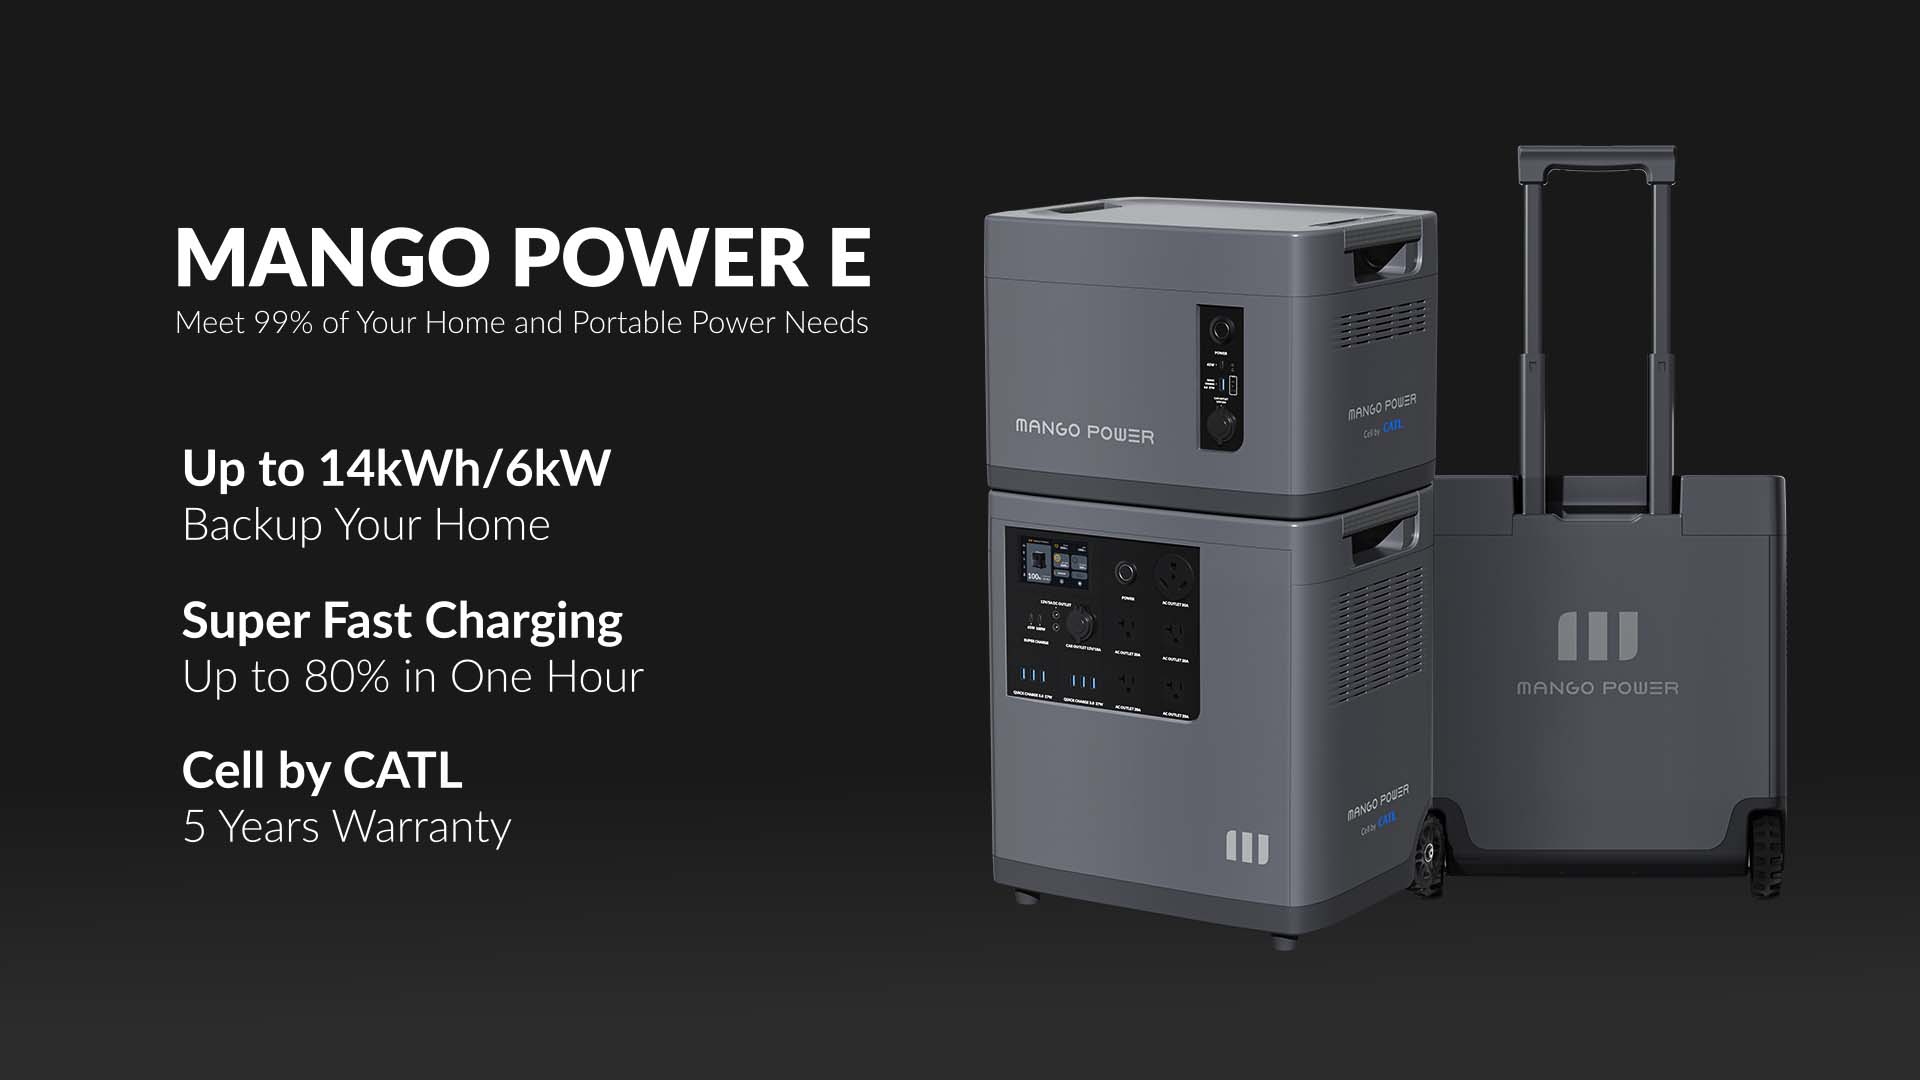 Meet 90% Of Your Home Power Needs With The Mango Power E